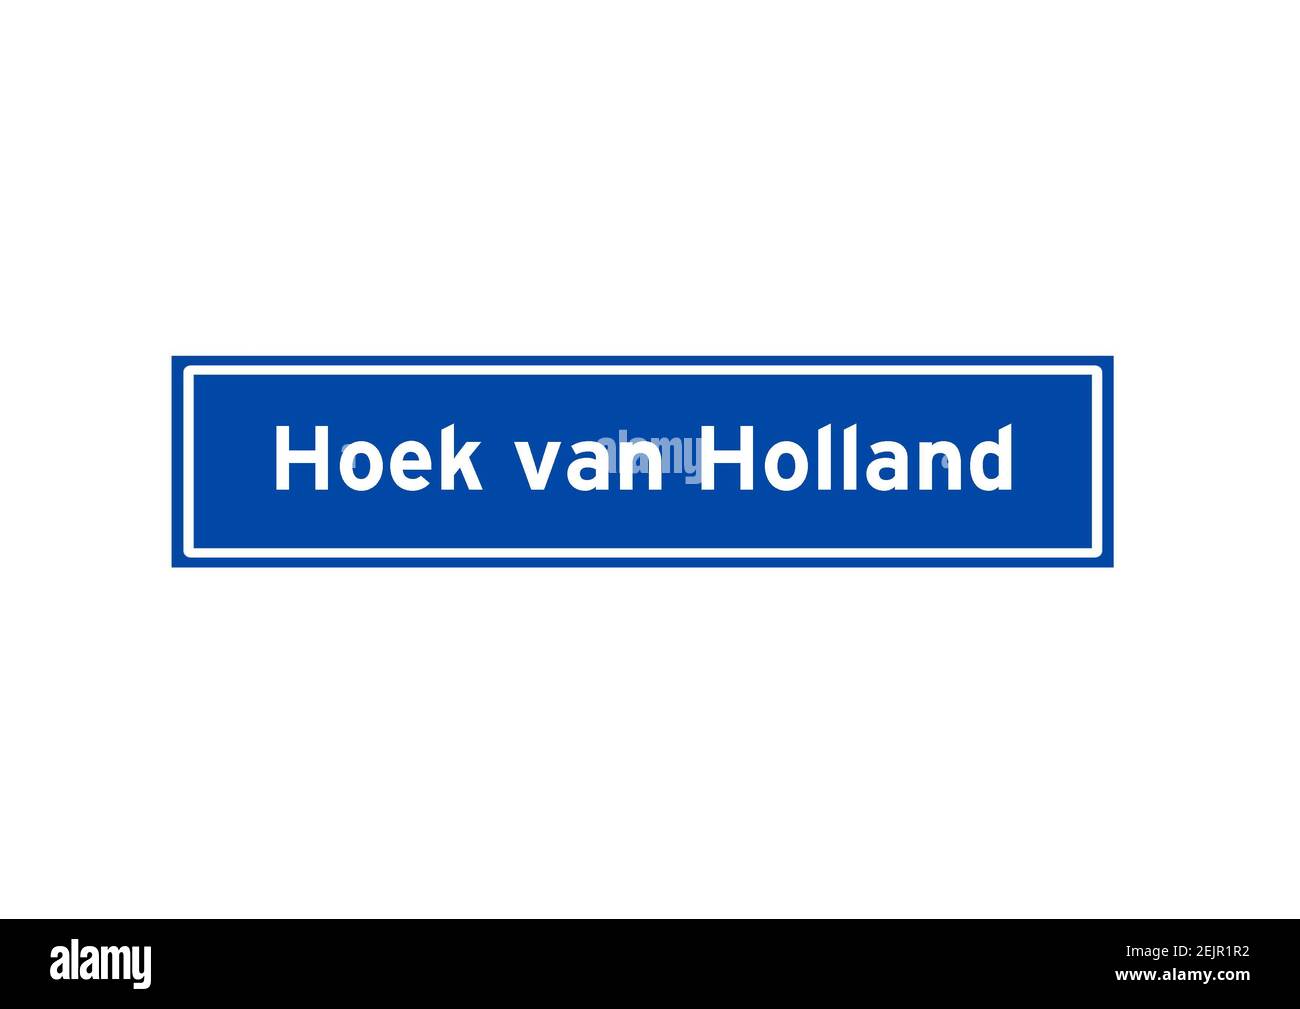 Hoek van Holland isolated Dutch place name sign. City sign from the Netherlands. Stock Photo